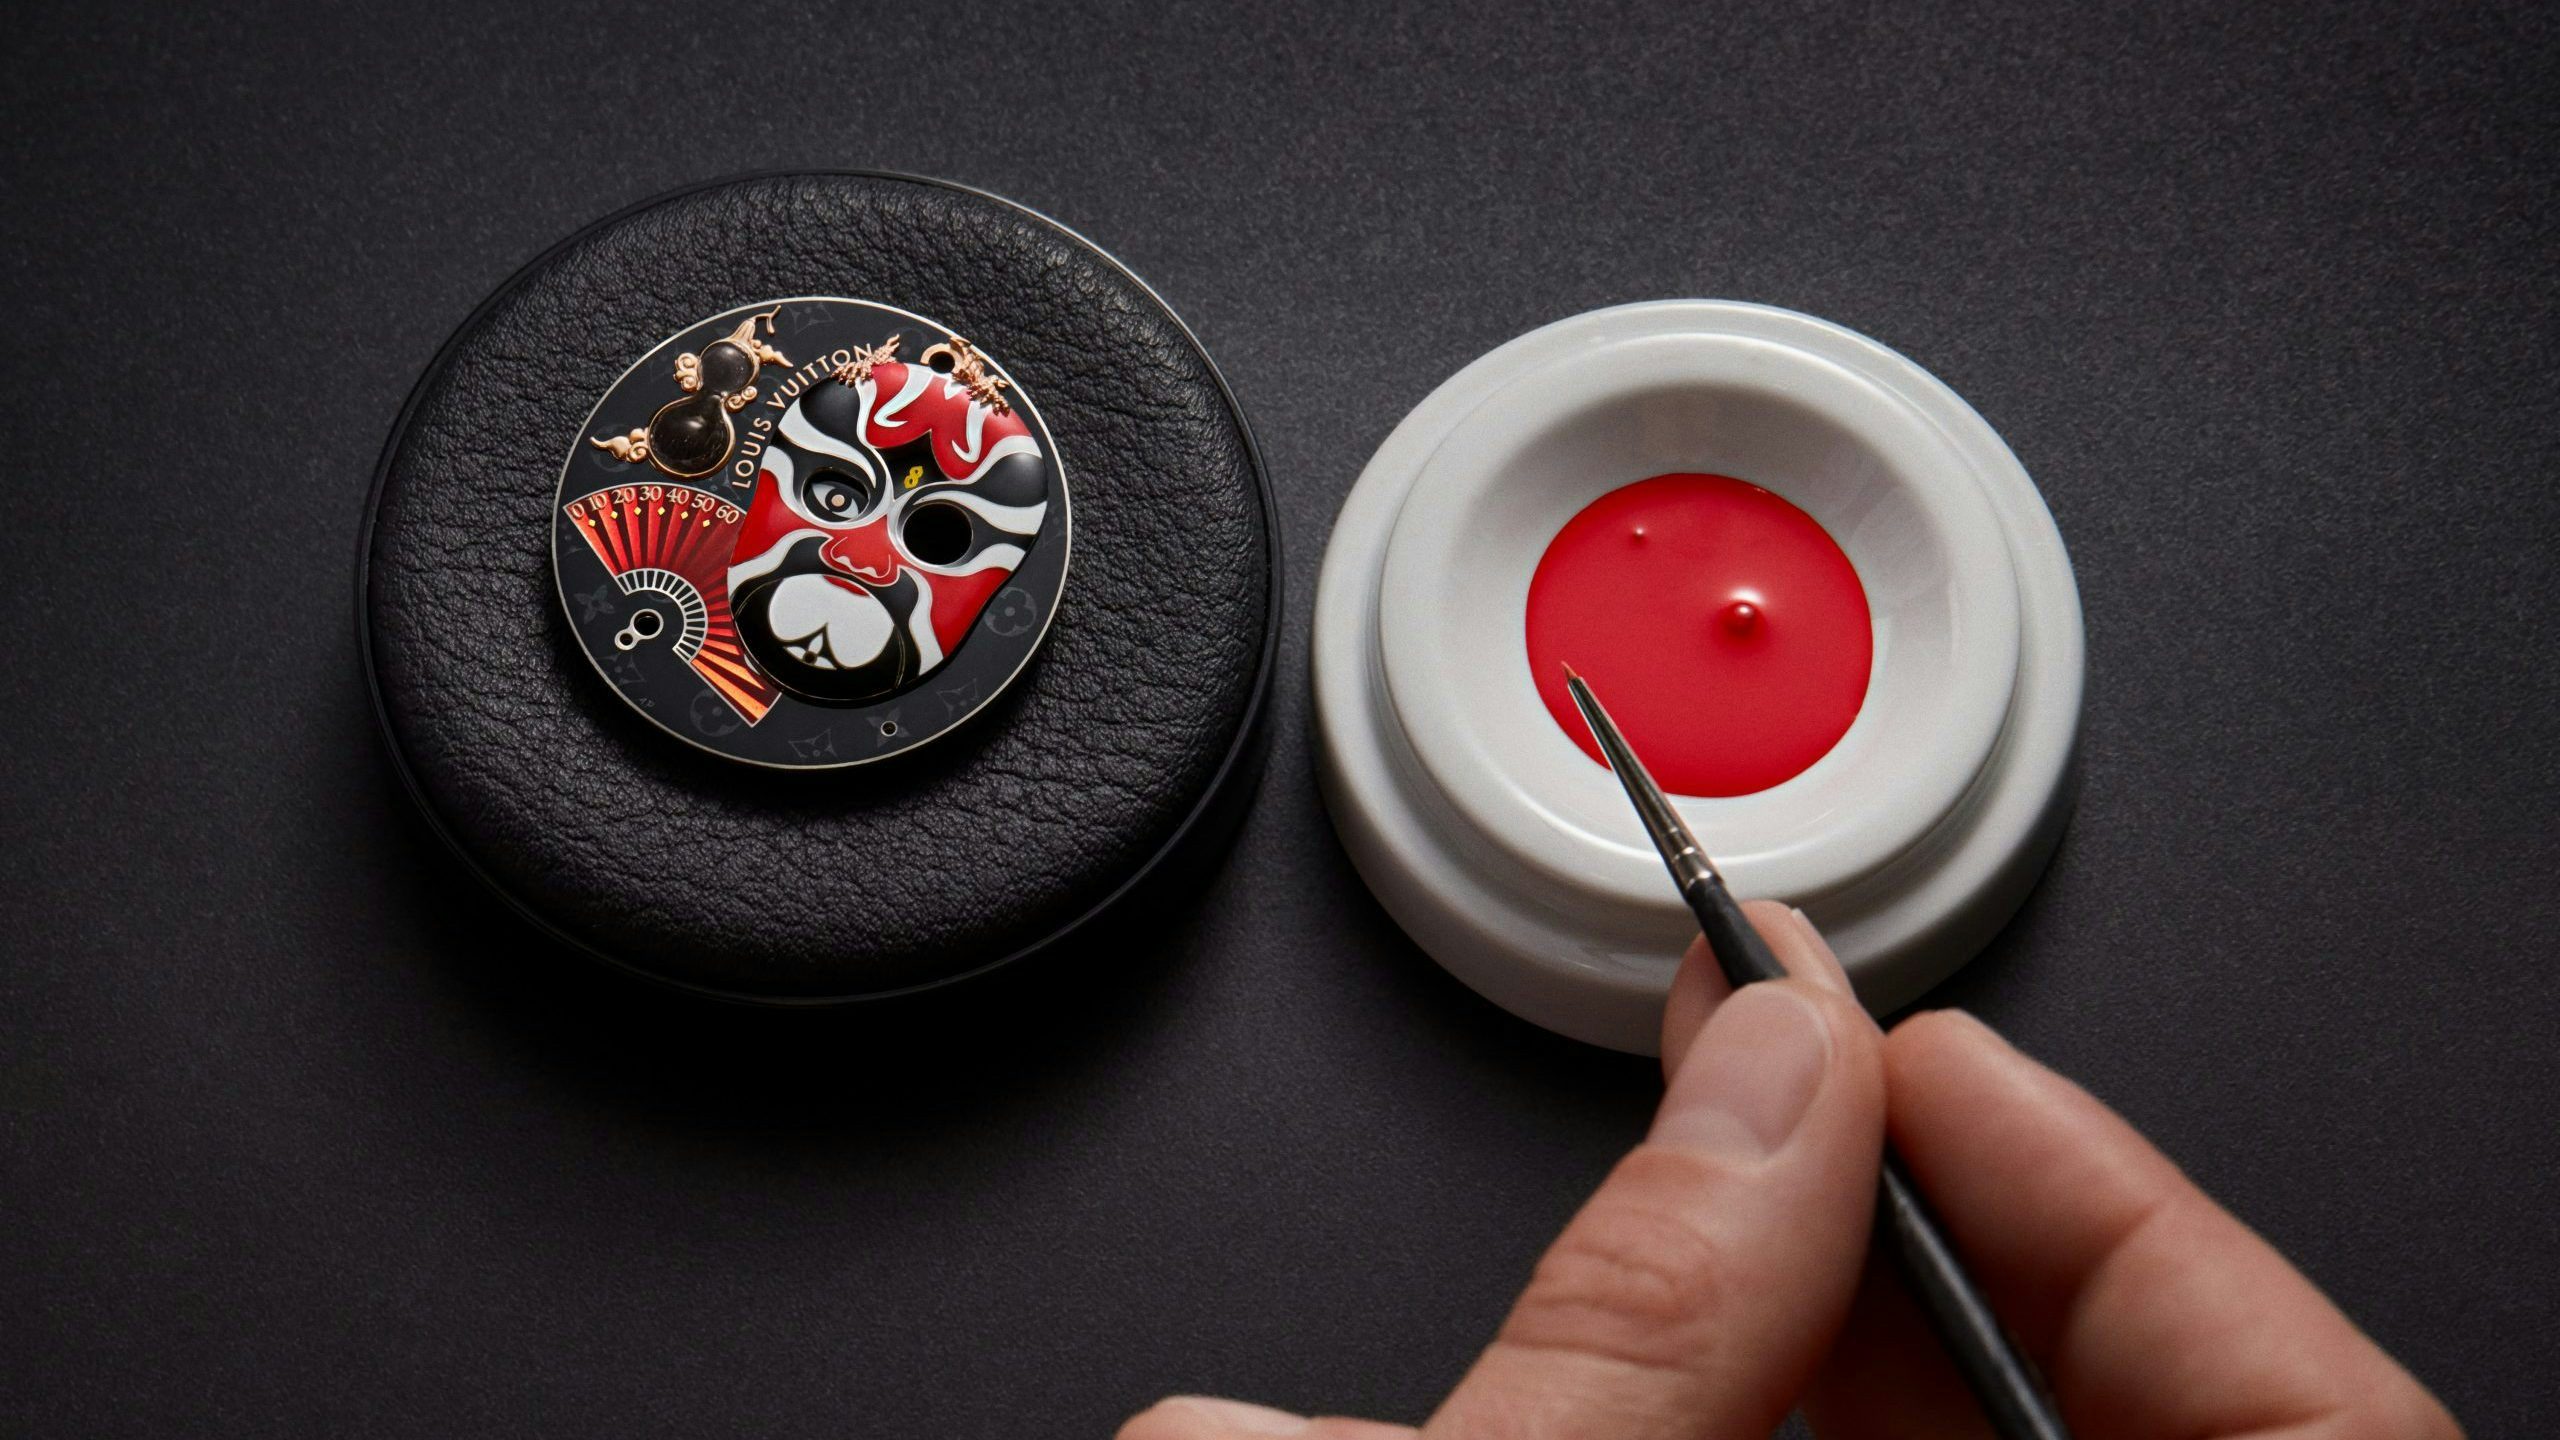 Louis Vuitton’s Newest Watch Is An Homage To Traditional Chinese Opera